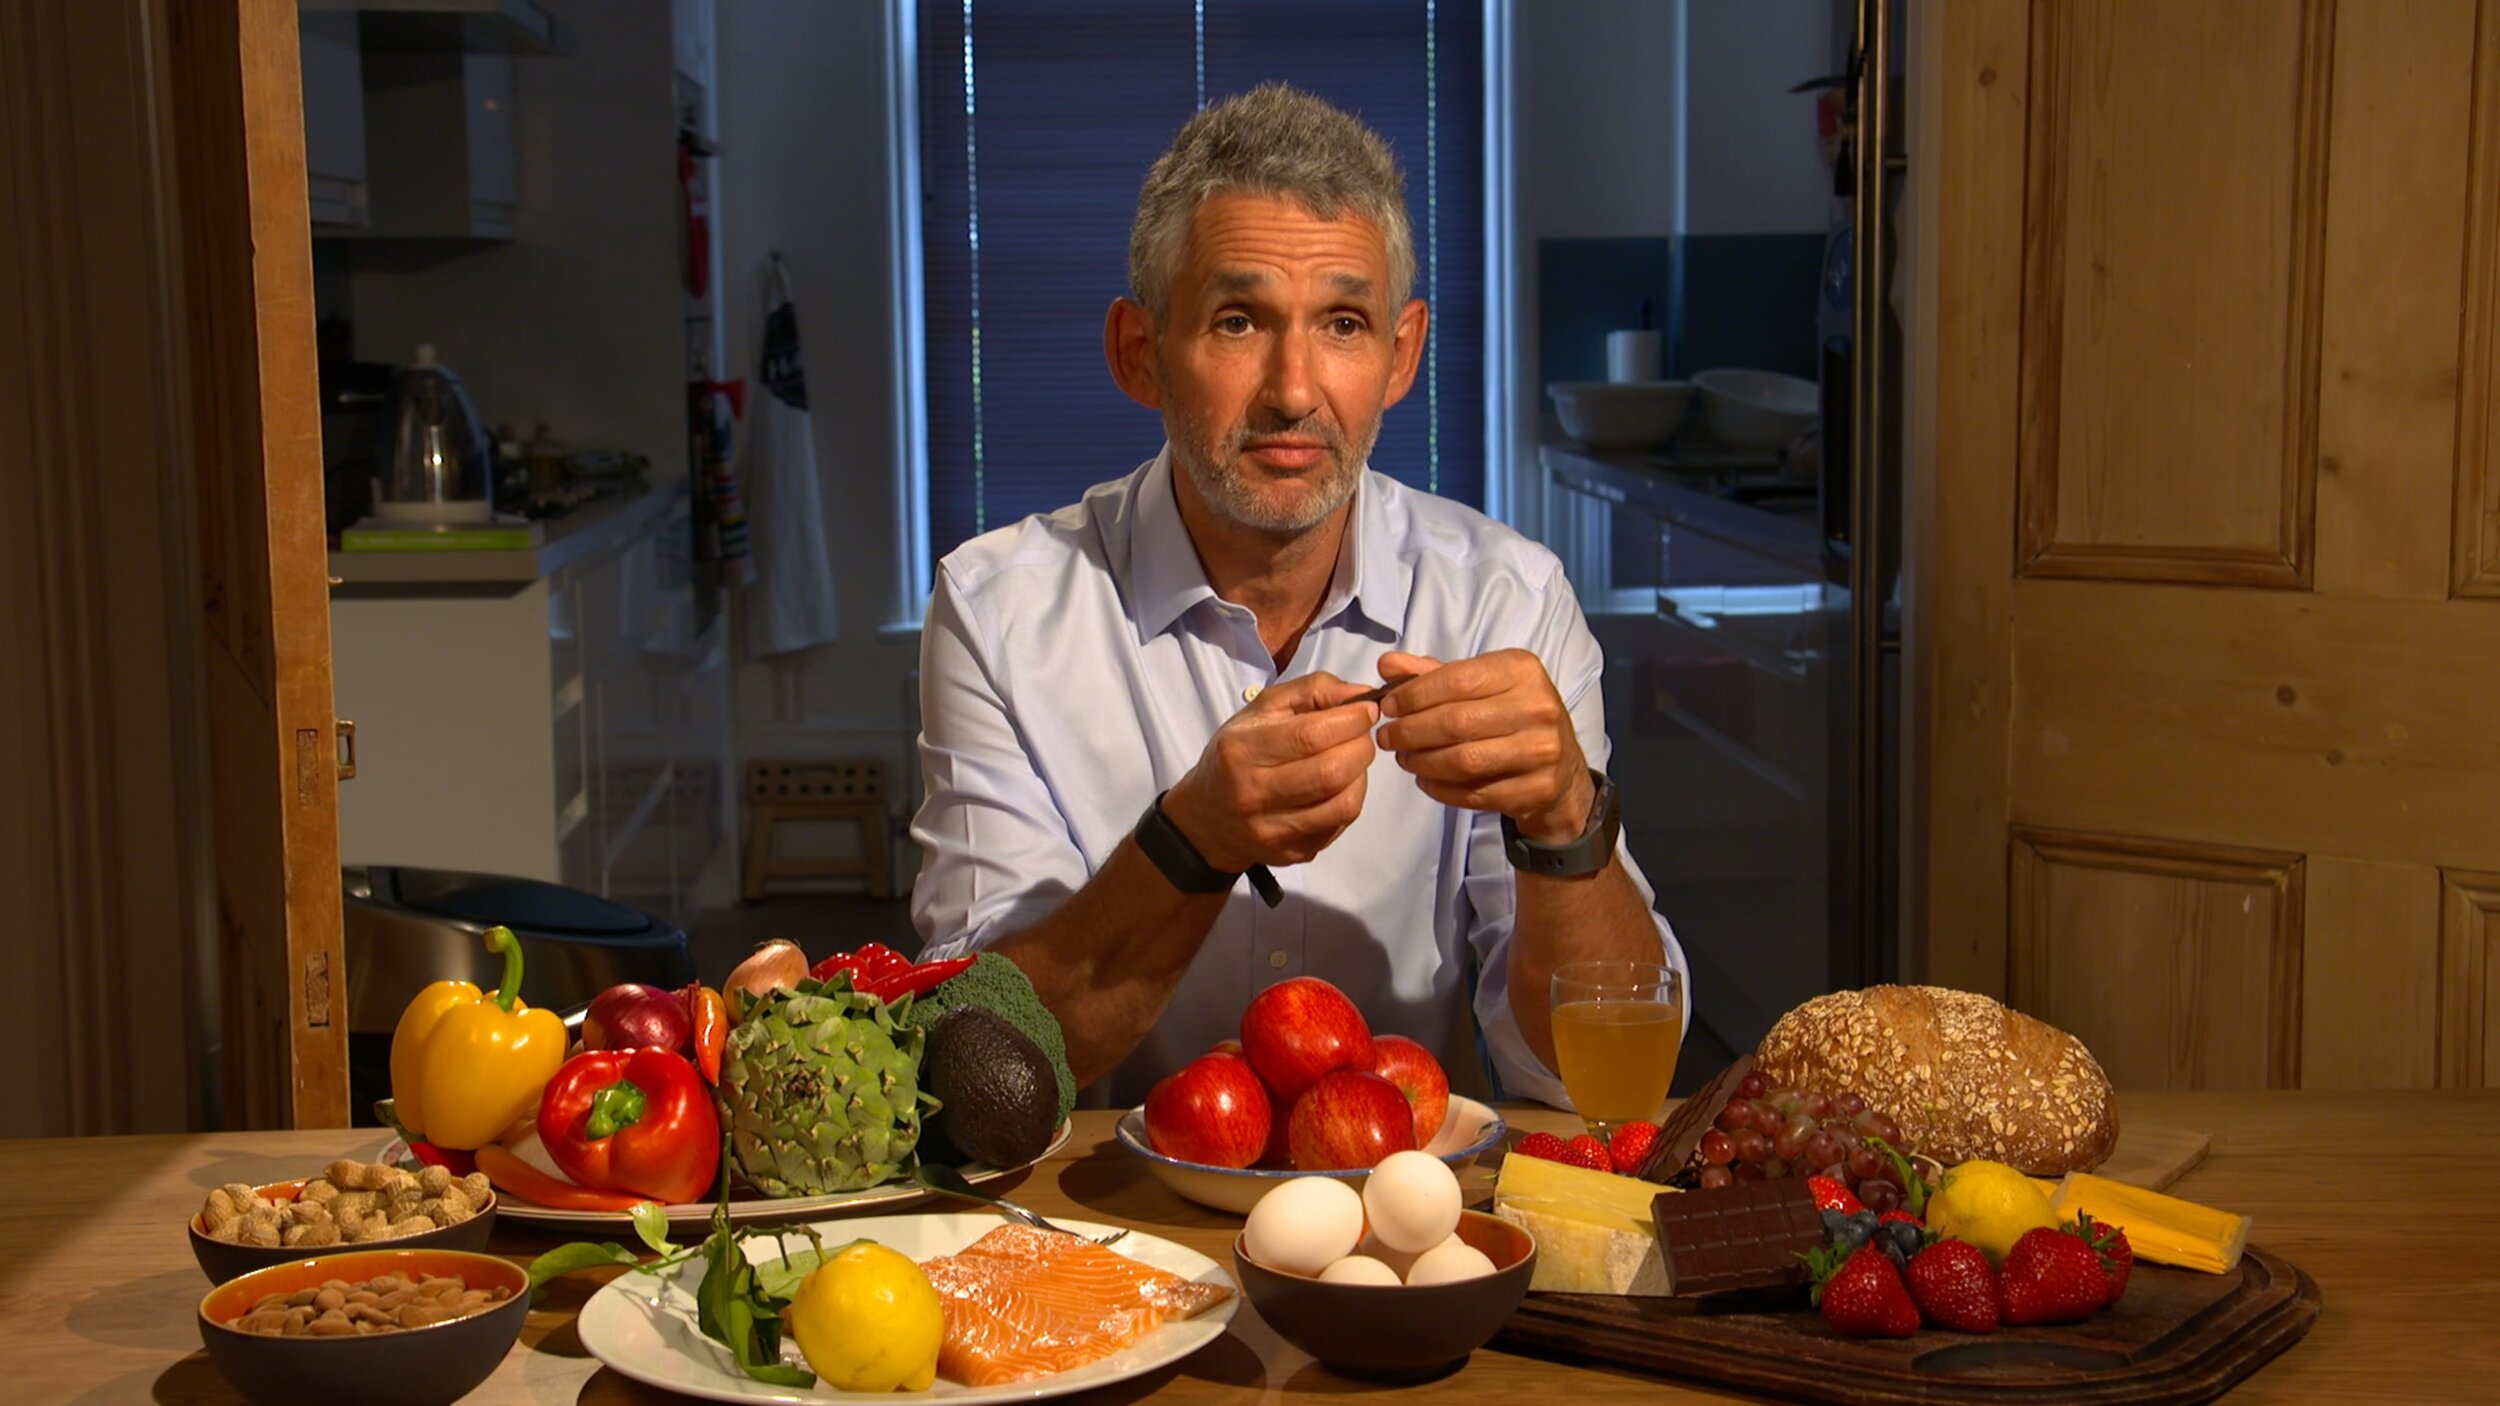 Tim Spector with table of food.02-min.jpg